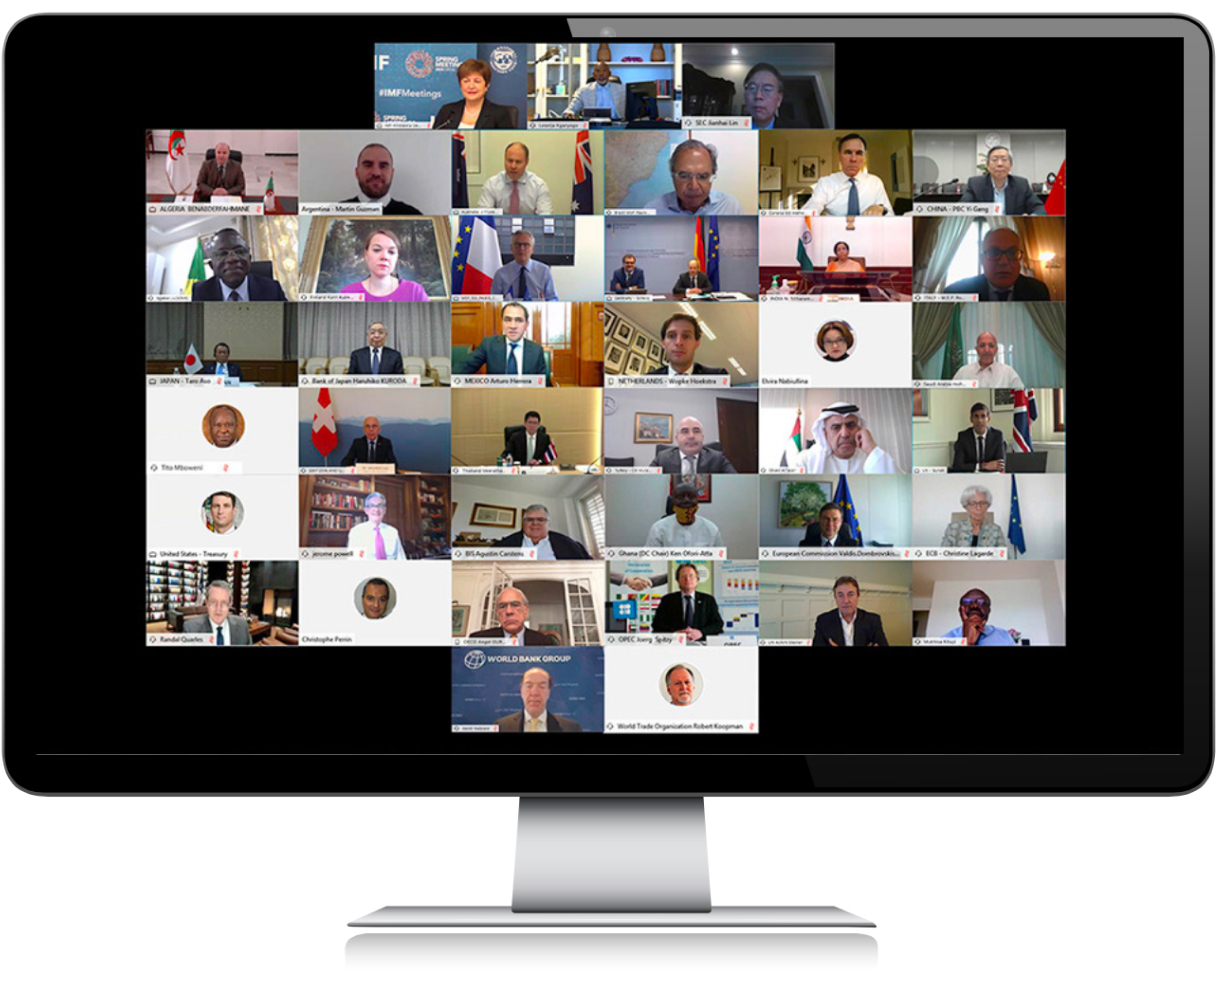 A group of IMF staff working remotely with remote video software